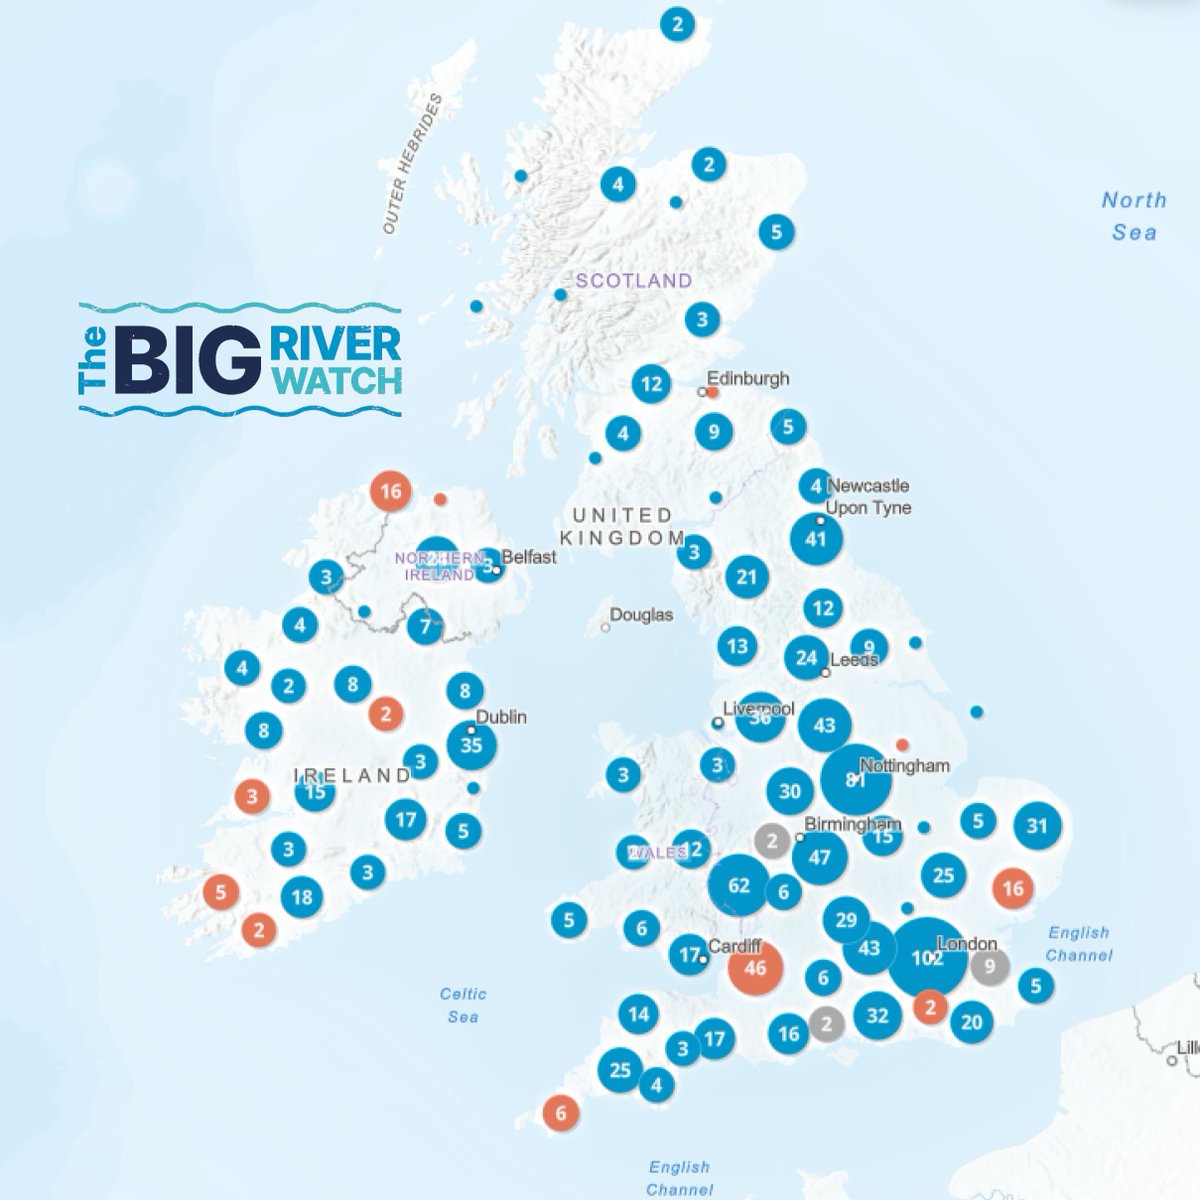 📷 Here's where our #BigRiverWatch-ers have surveyed so far. There's still time to help fill in the data map of NI & Ire. If you missed your chance this weekend, or you'd like to survey another stretch of river, do it before Thurs. Download our free app: theriverstrust.org/take-action/th…